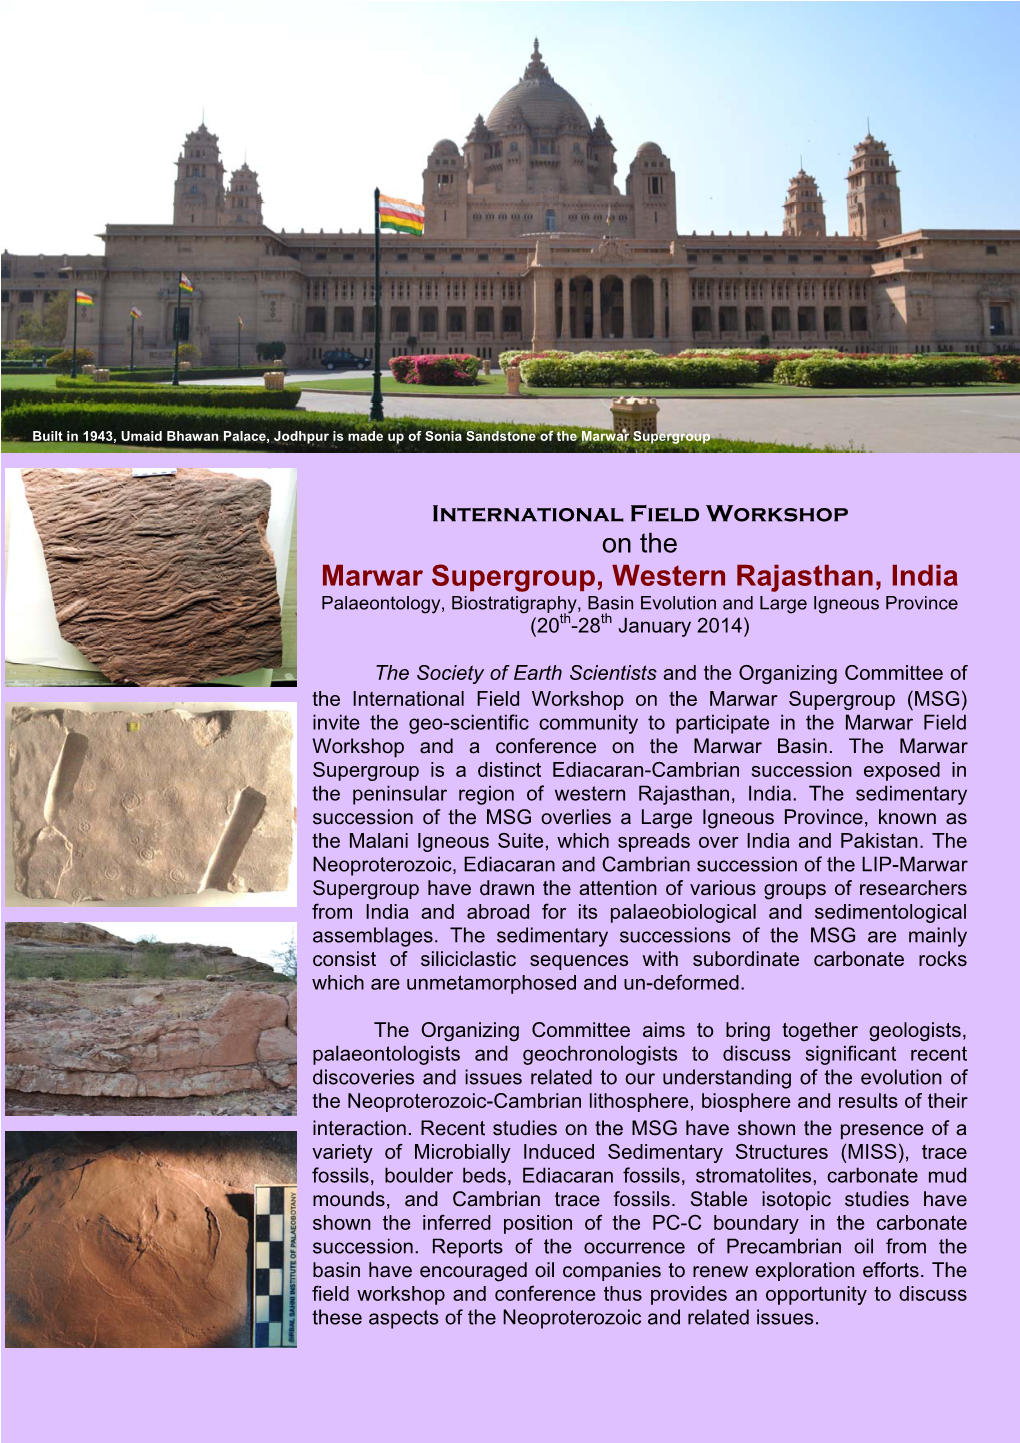 Marwar Supergroup, Western Rajasthan, India Palaeontology, Biostratigraphy, Basin Evolution and Large Igneous Province (20Th-28Th January 2014)